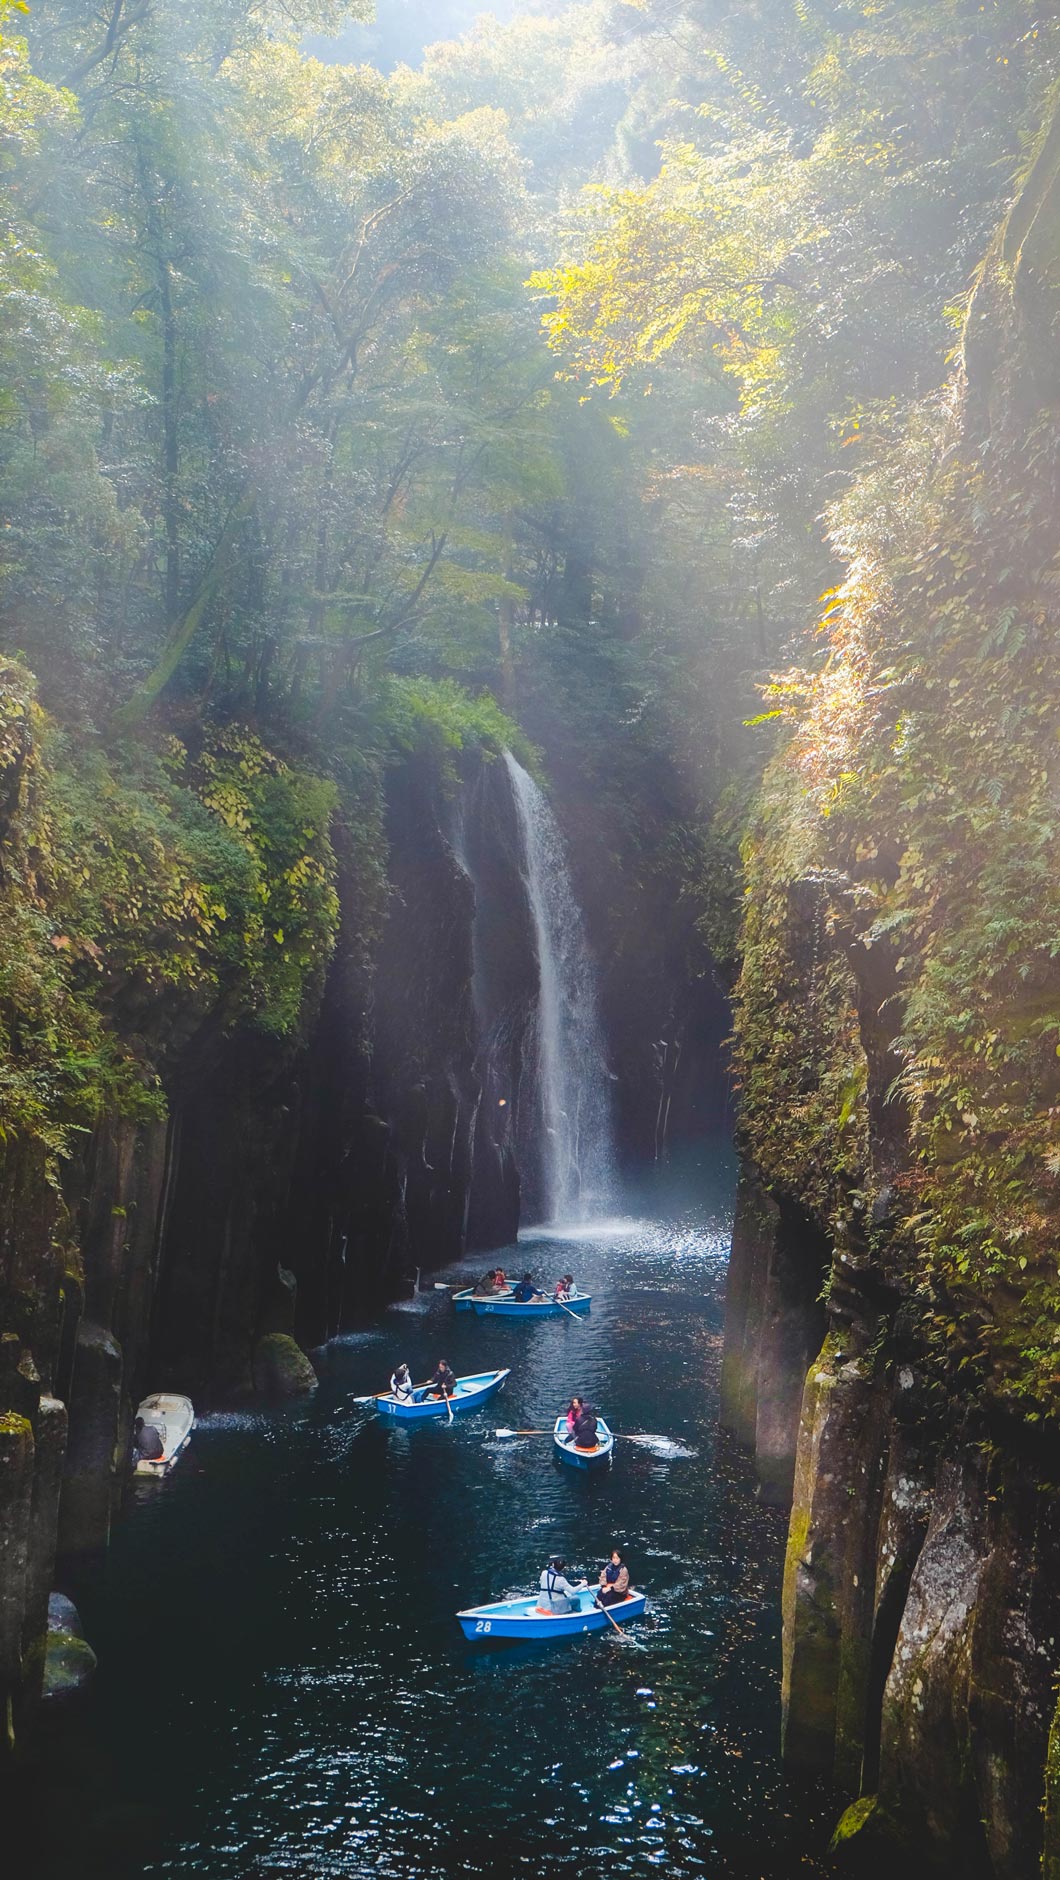 Boat ride at Takachiho Gorge